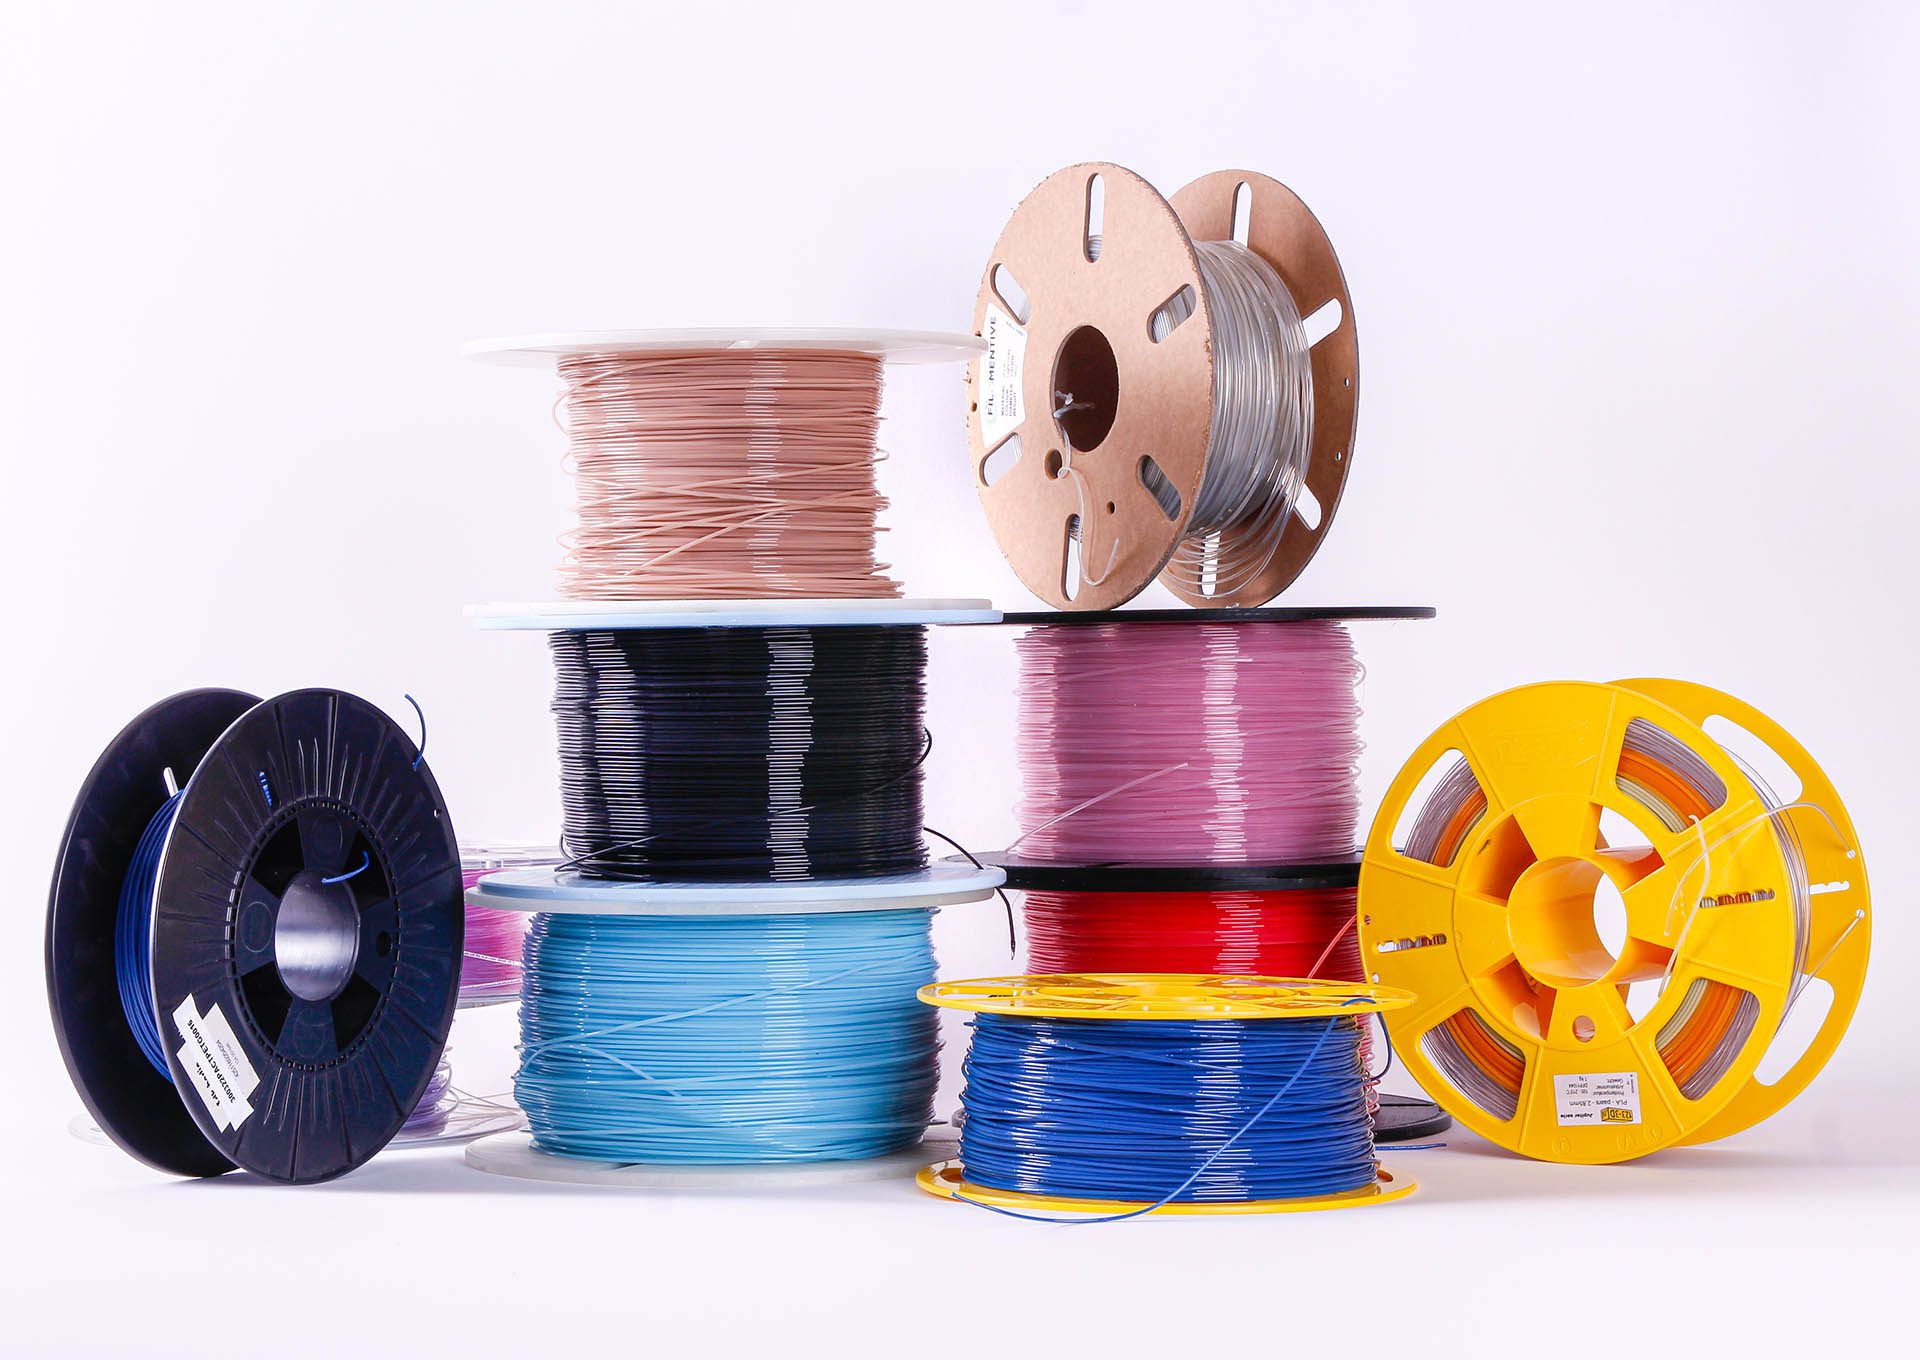 OurkilO - shredded plastic spools for recycling